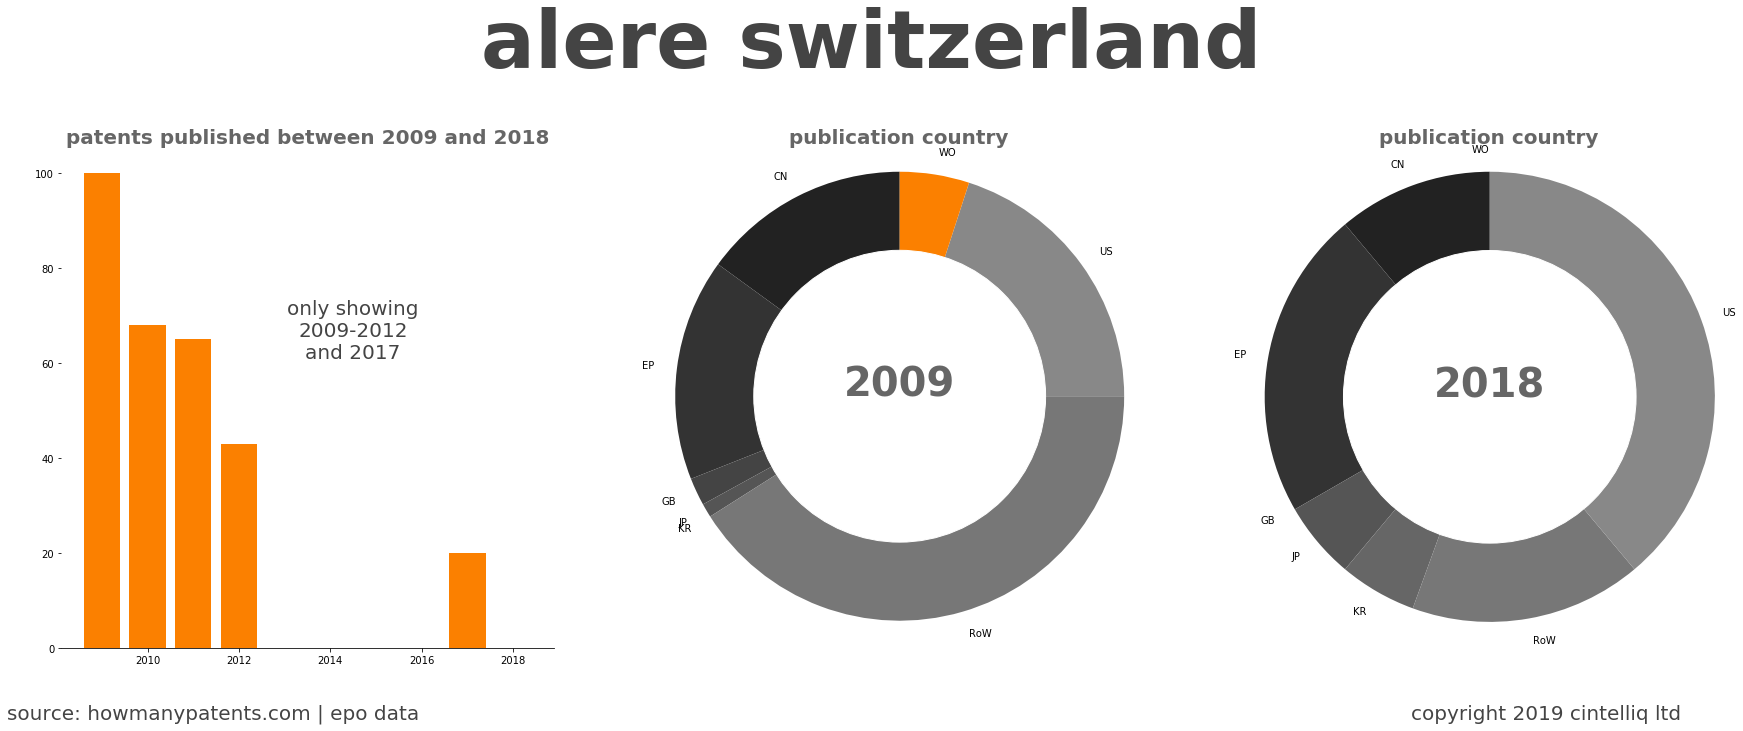 summary of patents for Alere Switzerland